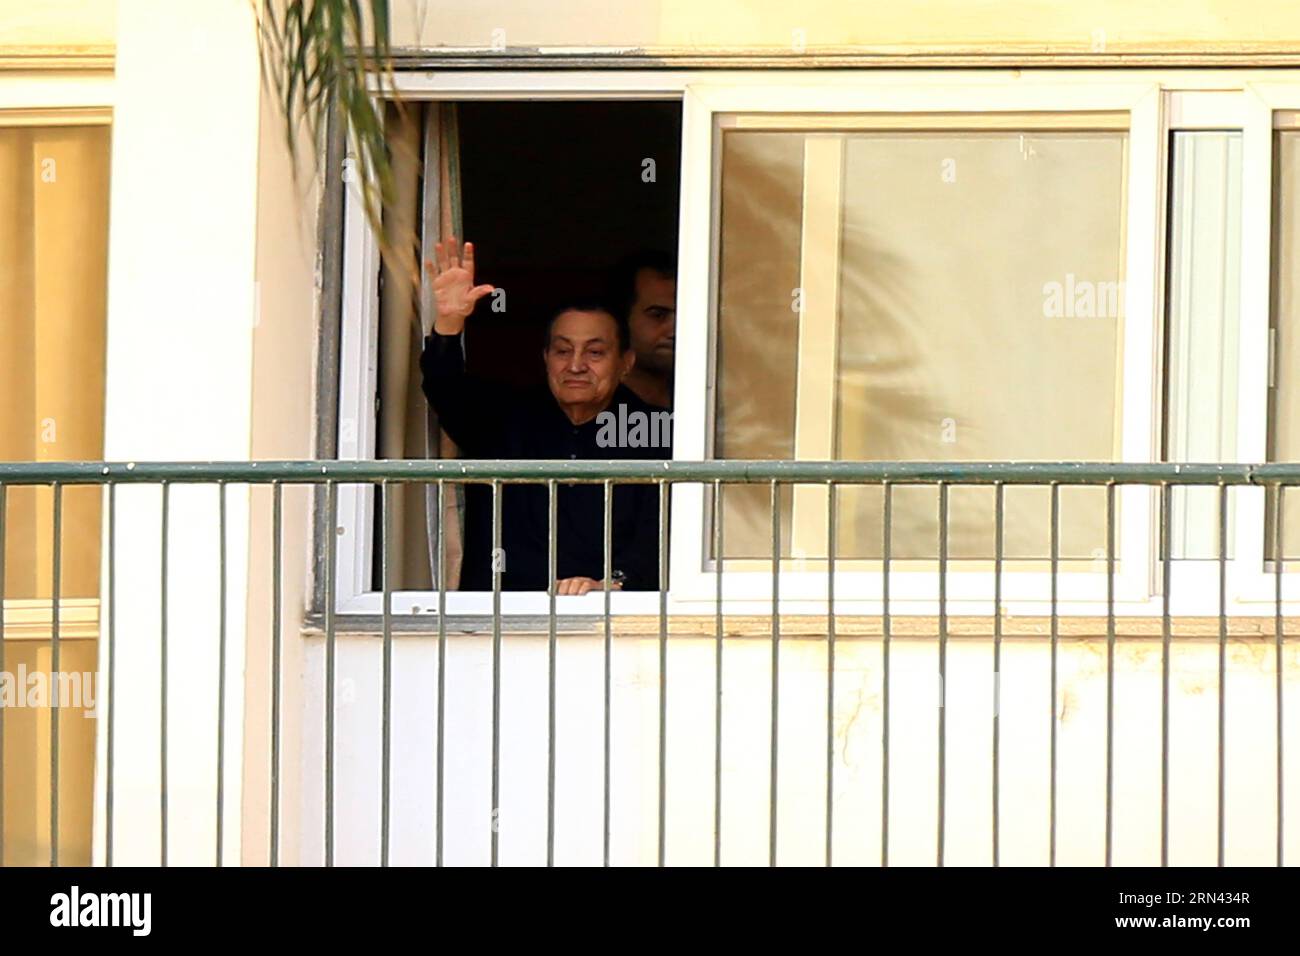 (150504) -- CAIRO, May 4, 2015 -- Egypt s former President Hosni Mubarak waves his hand from his room to supporters who gather outside Maadi Armed Forces Hospital where he is currently house arrested in Cairo, Egypt, on May 4, 2015. Supporters of the former president celebrated on Monday his 87-year birthday. ) EGYPT-CAIRO-MUBARAK-BIRTHDAY AhmedxRamadan PUBLICATIONxNOTxINxCHN   Cairo May 4 2015 Egypt S Former President Hosni Mubarak Waves His Hand from His Room to Supporters Who gather outside Maadi Armed Forces Hospital Where he IS currently House Arrested in Cairo Egypt ON May 4 2015 Support Stock Photo